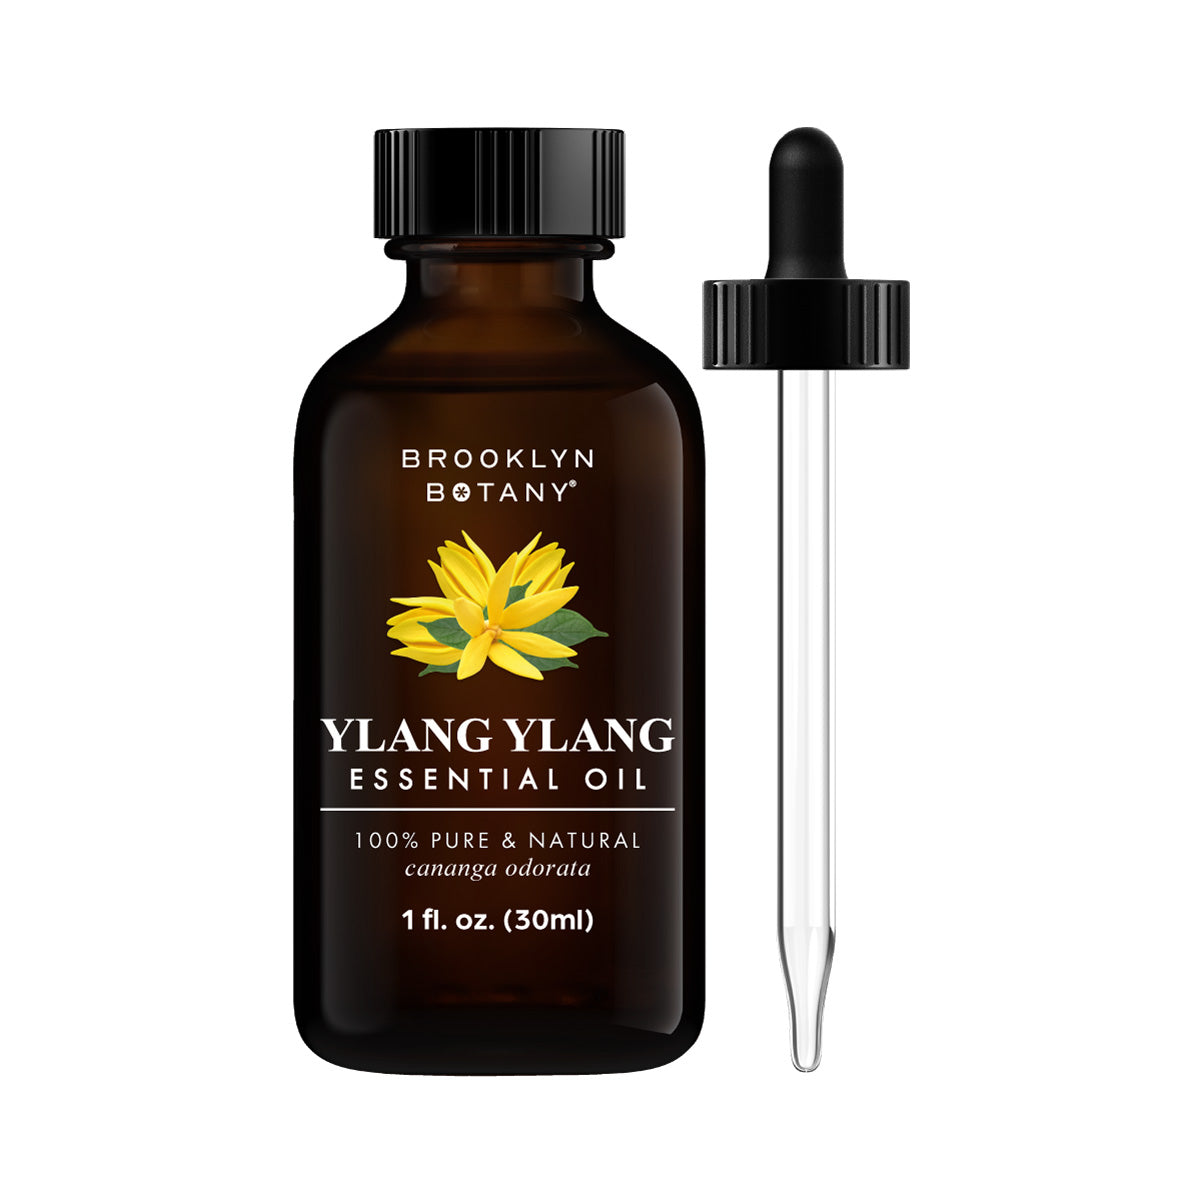 Shopify-BB-30ml-Ylang-Ylang-Essential-Oil-Main-Image-with-Sides.jpg